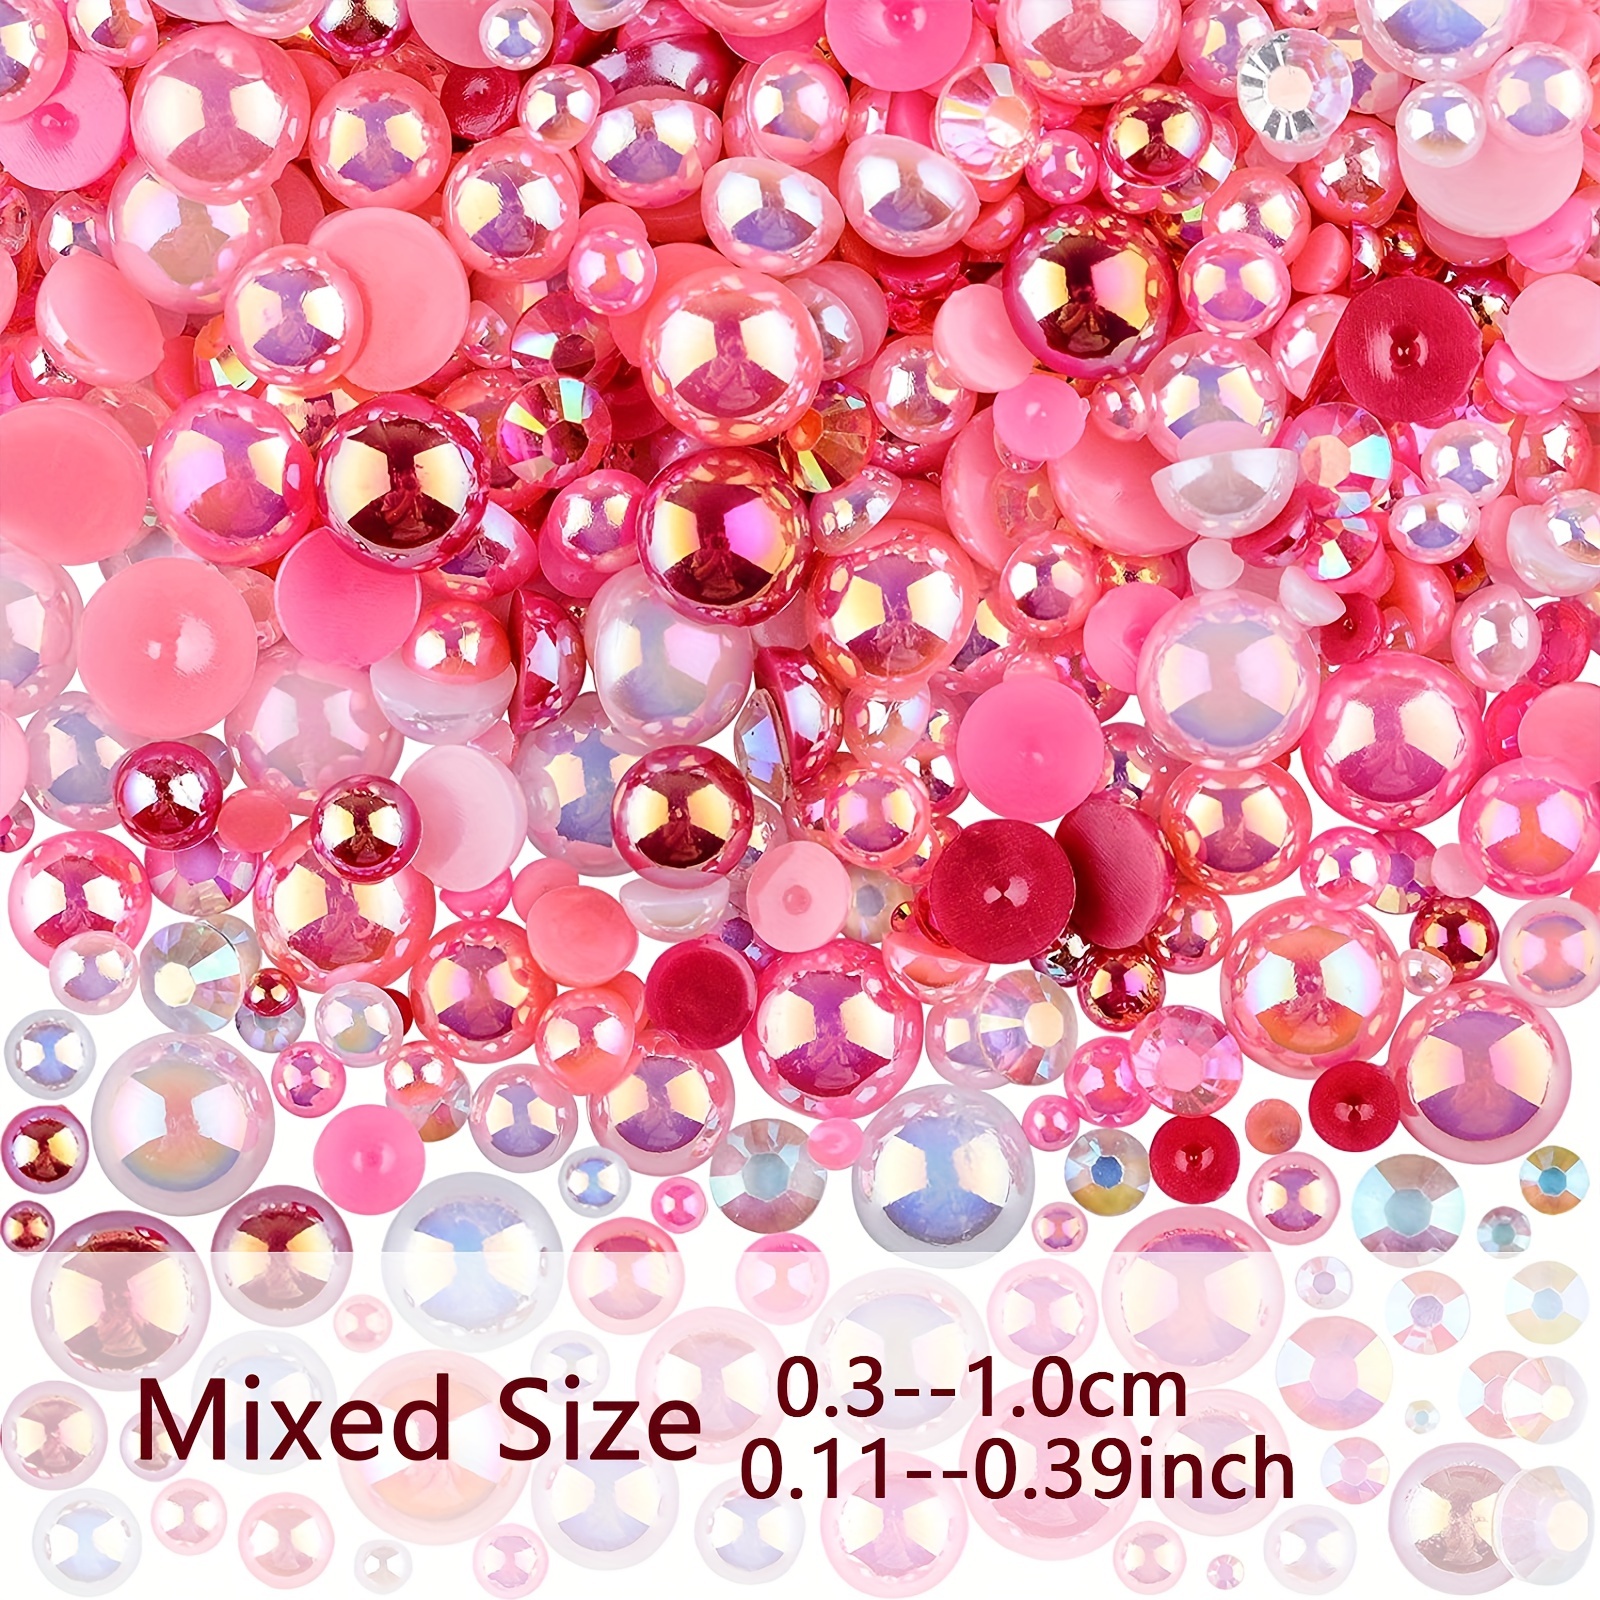  Briskbloom 60g Mix Pearls and Rhinestones for Crafts, 3620PCS  2mm-10mm Flatback Pearl Rhinestones for Nails Face Art Tumblers, Jelly  Rhinestones and Half Pearls, Light Pink, Hot Pink